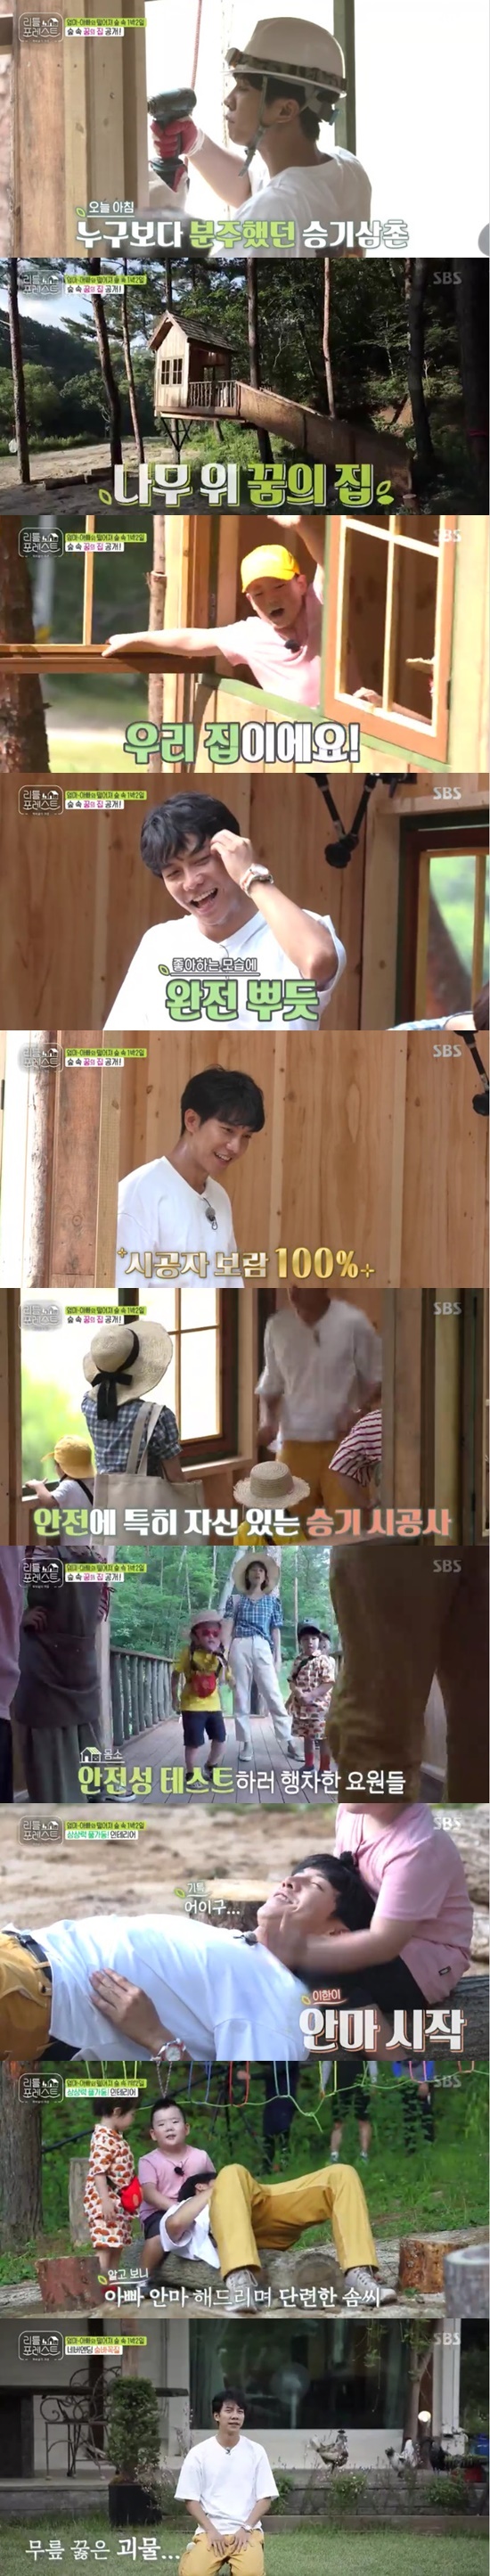 Seoul = = Little Forest Lee Seung-gi produced and built a treehouse for Little People.In the SBS month and the episode entertainment program Little Forest broadcasted on the night of the 26th, the cabin Treehouse in the forest produced by Lee Seung-gi was released.Lee Seung-gi had previously said in a pre-meeting with the production team that he wanted to build a house on a tree.Lee Seung-gi participated in the production of treehouses of the pimple using the woodworking technology learned in advance.Lee Seung-gi was enthusiastic about participating in the production finals.Treehouse, which was full of childrens expectations before completion, has powered Lee Seung-gi.The children ate lunch and headed for Treehouse, where Lee Seung-gi introduced Tree House, saying, Its the first house my uncle built.Lee Seung-gi looked at the children with a proud smile at the children who were cheering and admiring the treehouse.Lee Seung-gi boasted of the strength of the treehouse and encouraged him to jump; Lee Hani jumped in place and said, Cant you decorate it here?The children began to decorate their homes with the ashRys they found in nature.Then the children were competing for strength and the treehouse was full of trees.Lee Han came to Lee Seung-gi, who lay down for a while, and Lee began to massage Lee Seung-gis shoulder quietly and gave him warmth.At the end of the broadcast, Lee Seung-gi was struggling with his endless hide-and-seek with children, eventually kneeling down with sweat.On the other hand, SBS Little Forest is an pollution-free clean entertainment that opens an eco-friendly care house where Lee Seo-jin, Lee Seung-gi, Park Na-rae and Jung So-min can play with children in a nature full of green grass and clear air. It is broadcast every Monday and Tuesday at 10 pm.